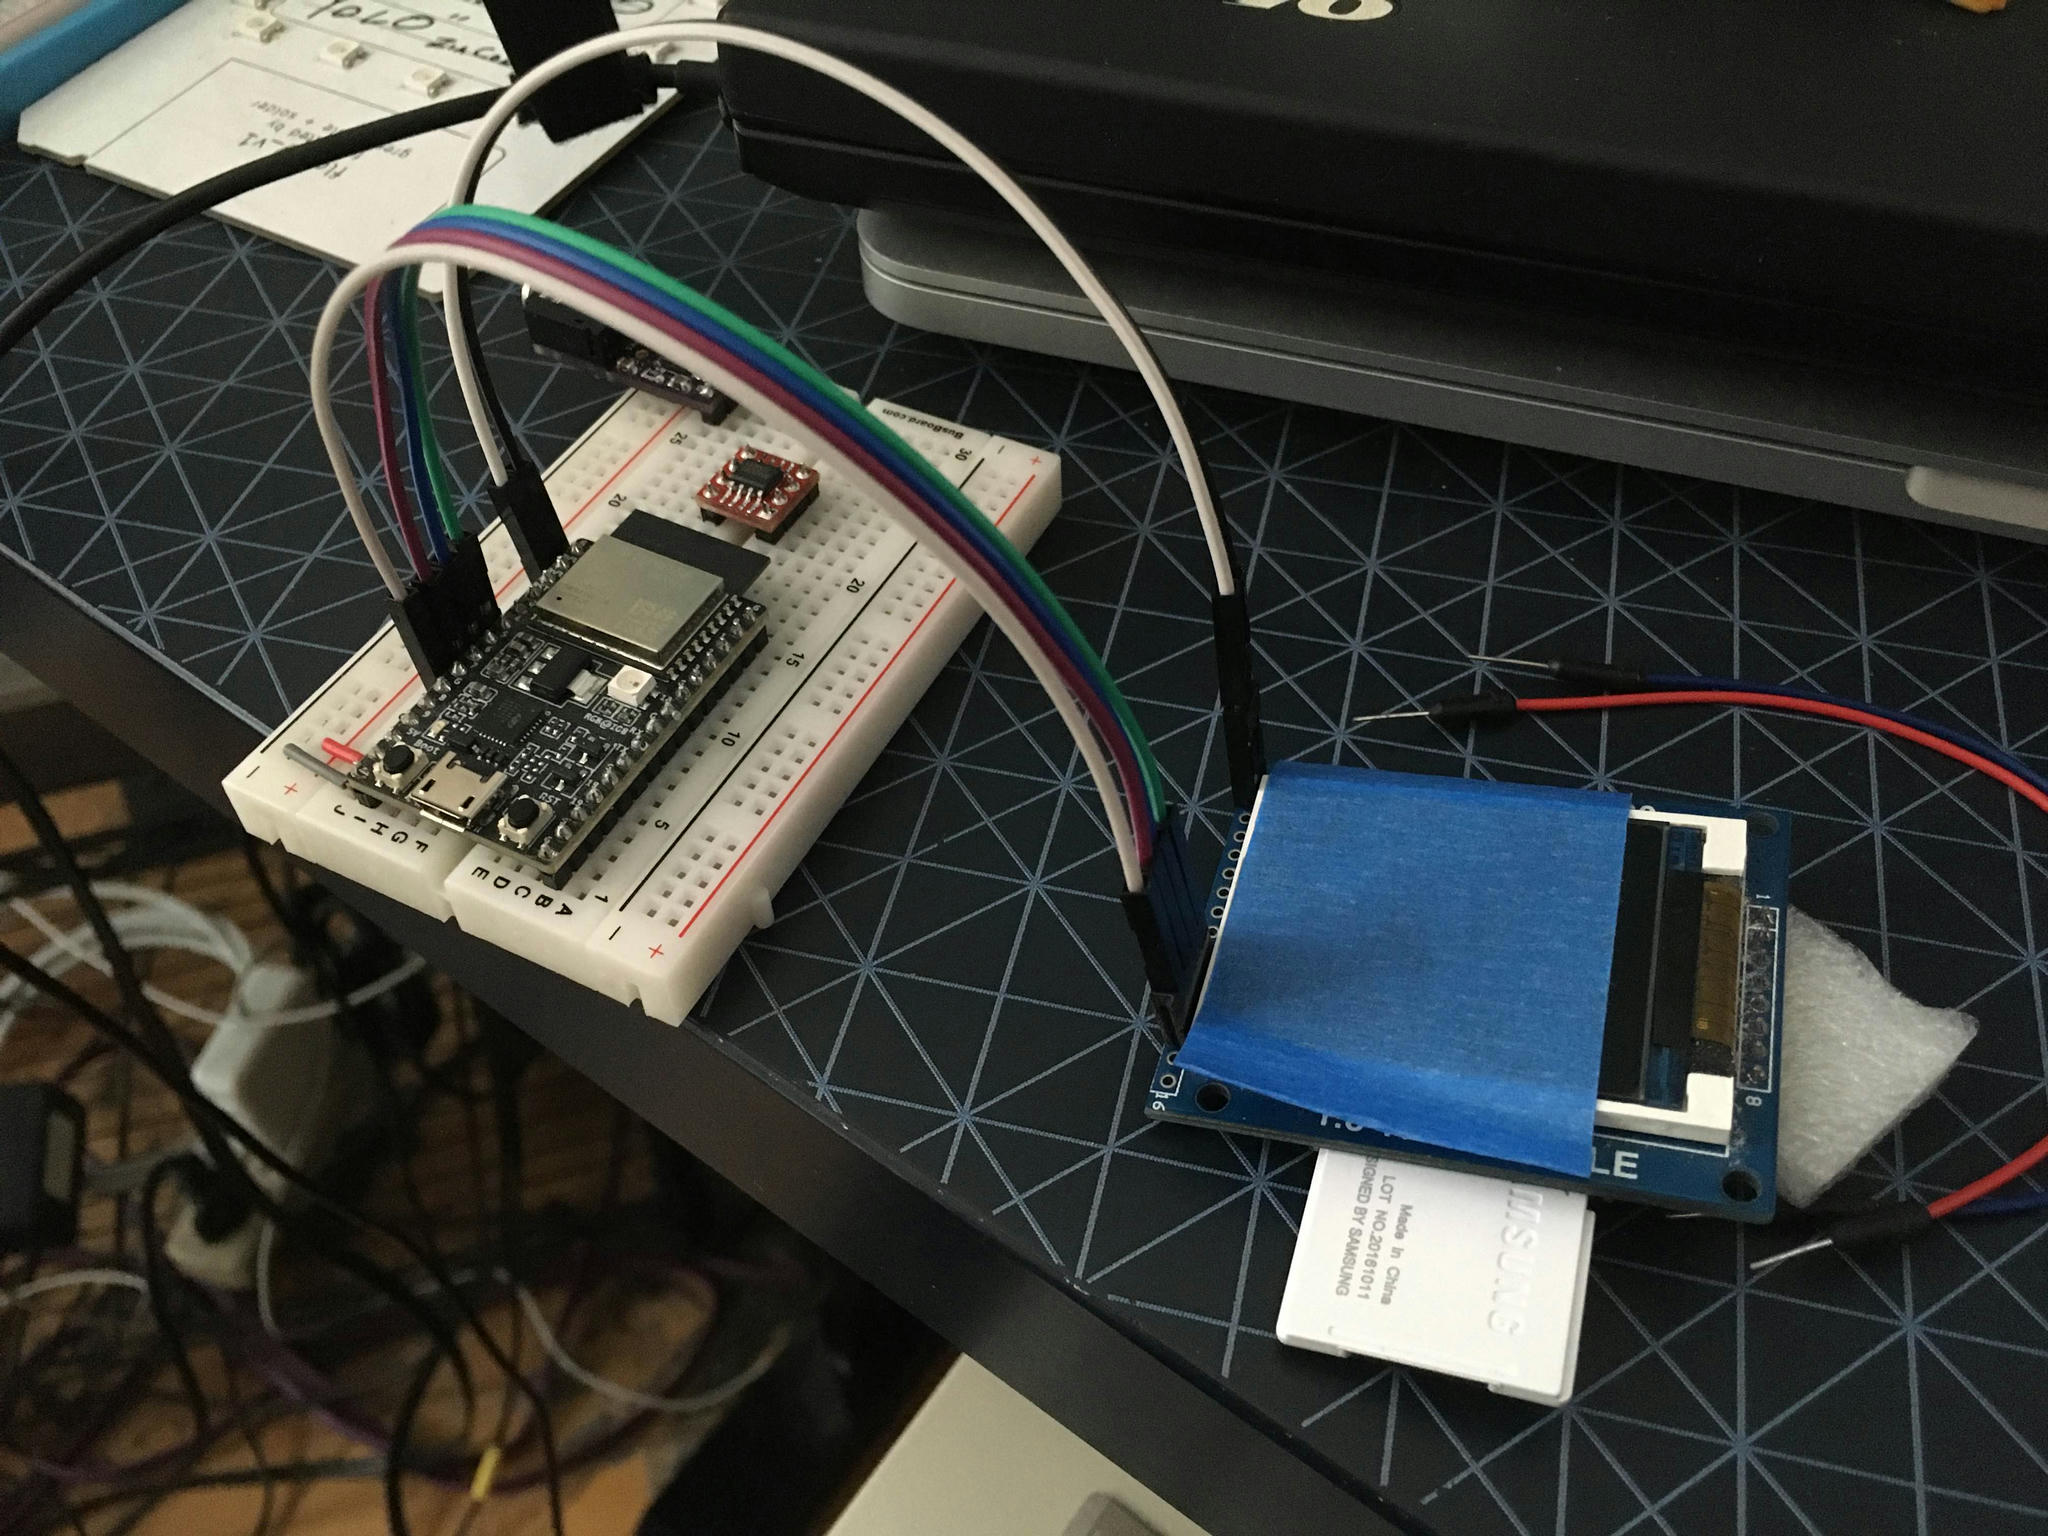 TFT adapter with SD card slot
connected to an ESP32-C3 on a breadboard